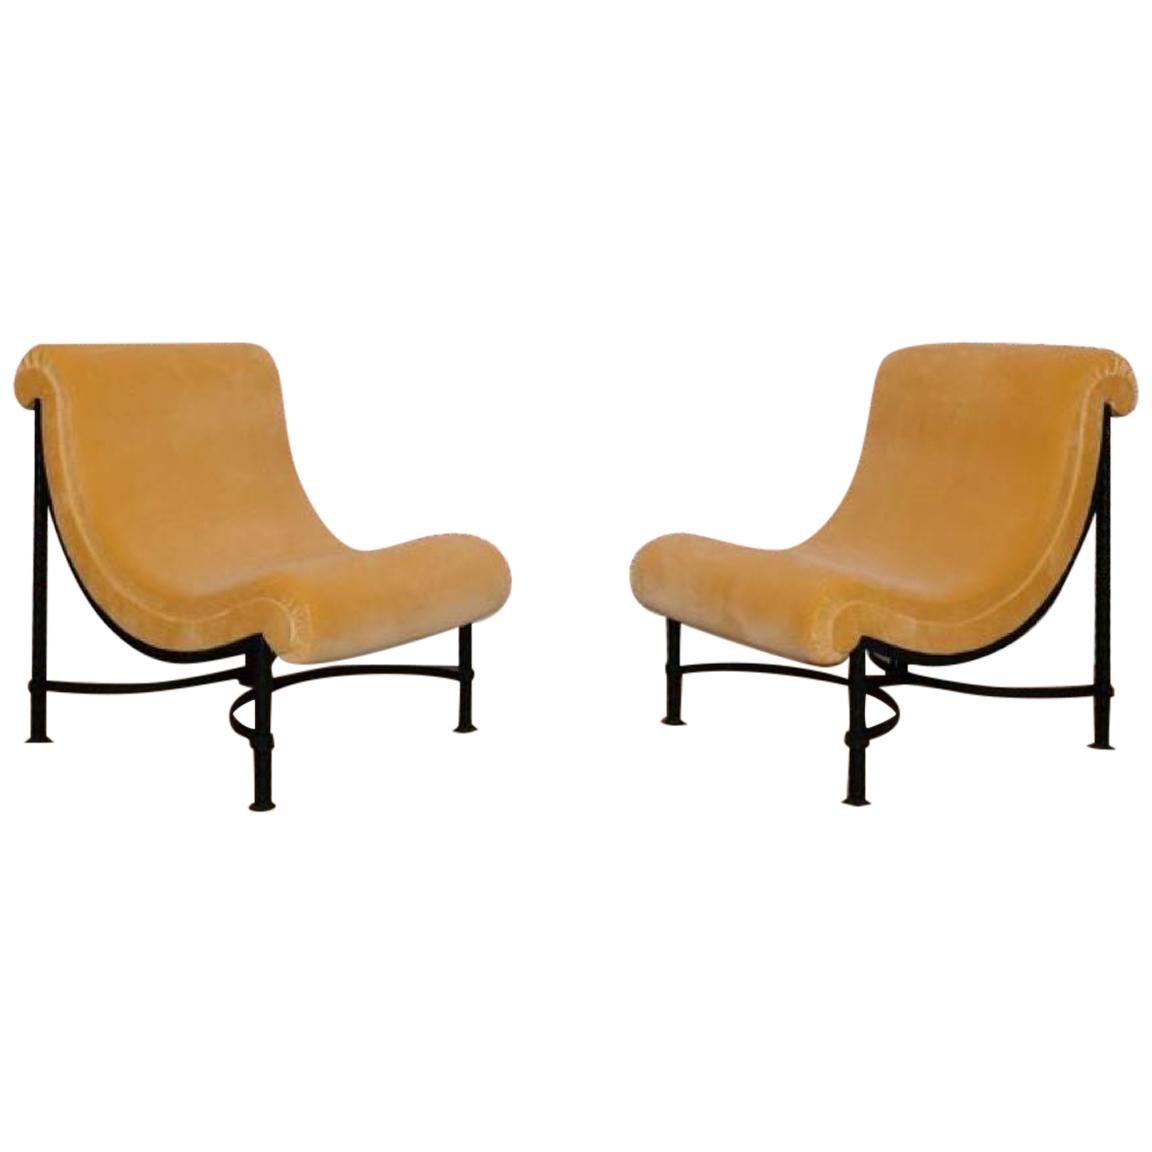 Pair of Large Curved Upholstered Lounge Chairs on Black Metal Bases